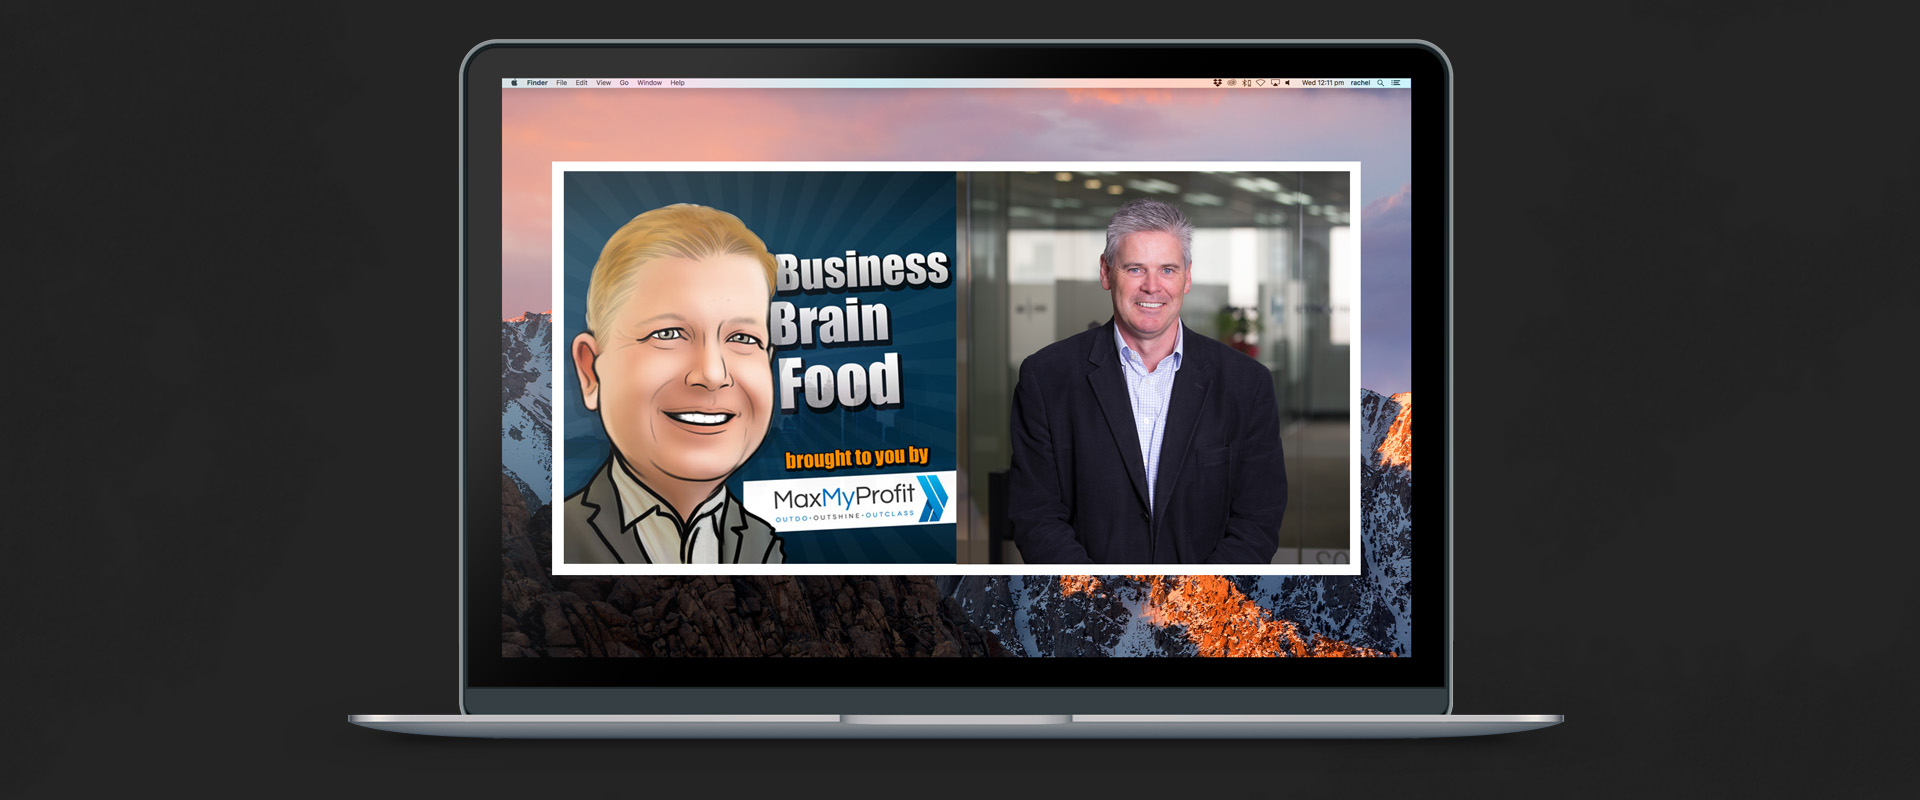 Business Brain Food's logo and Damian Kernahan's image side-by-side on a laptop screen, showing them together on Ben Fewtrell's Brainfood Podcast